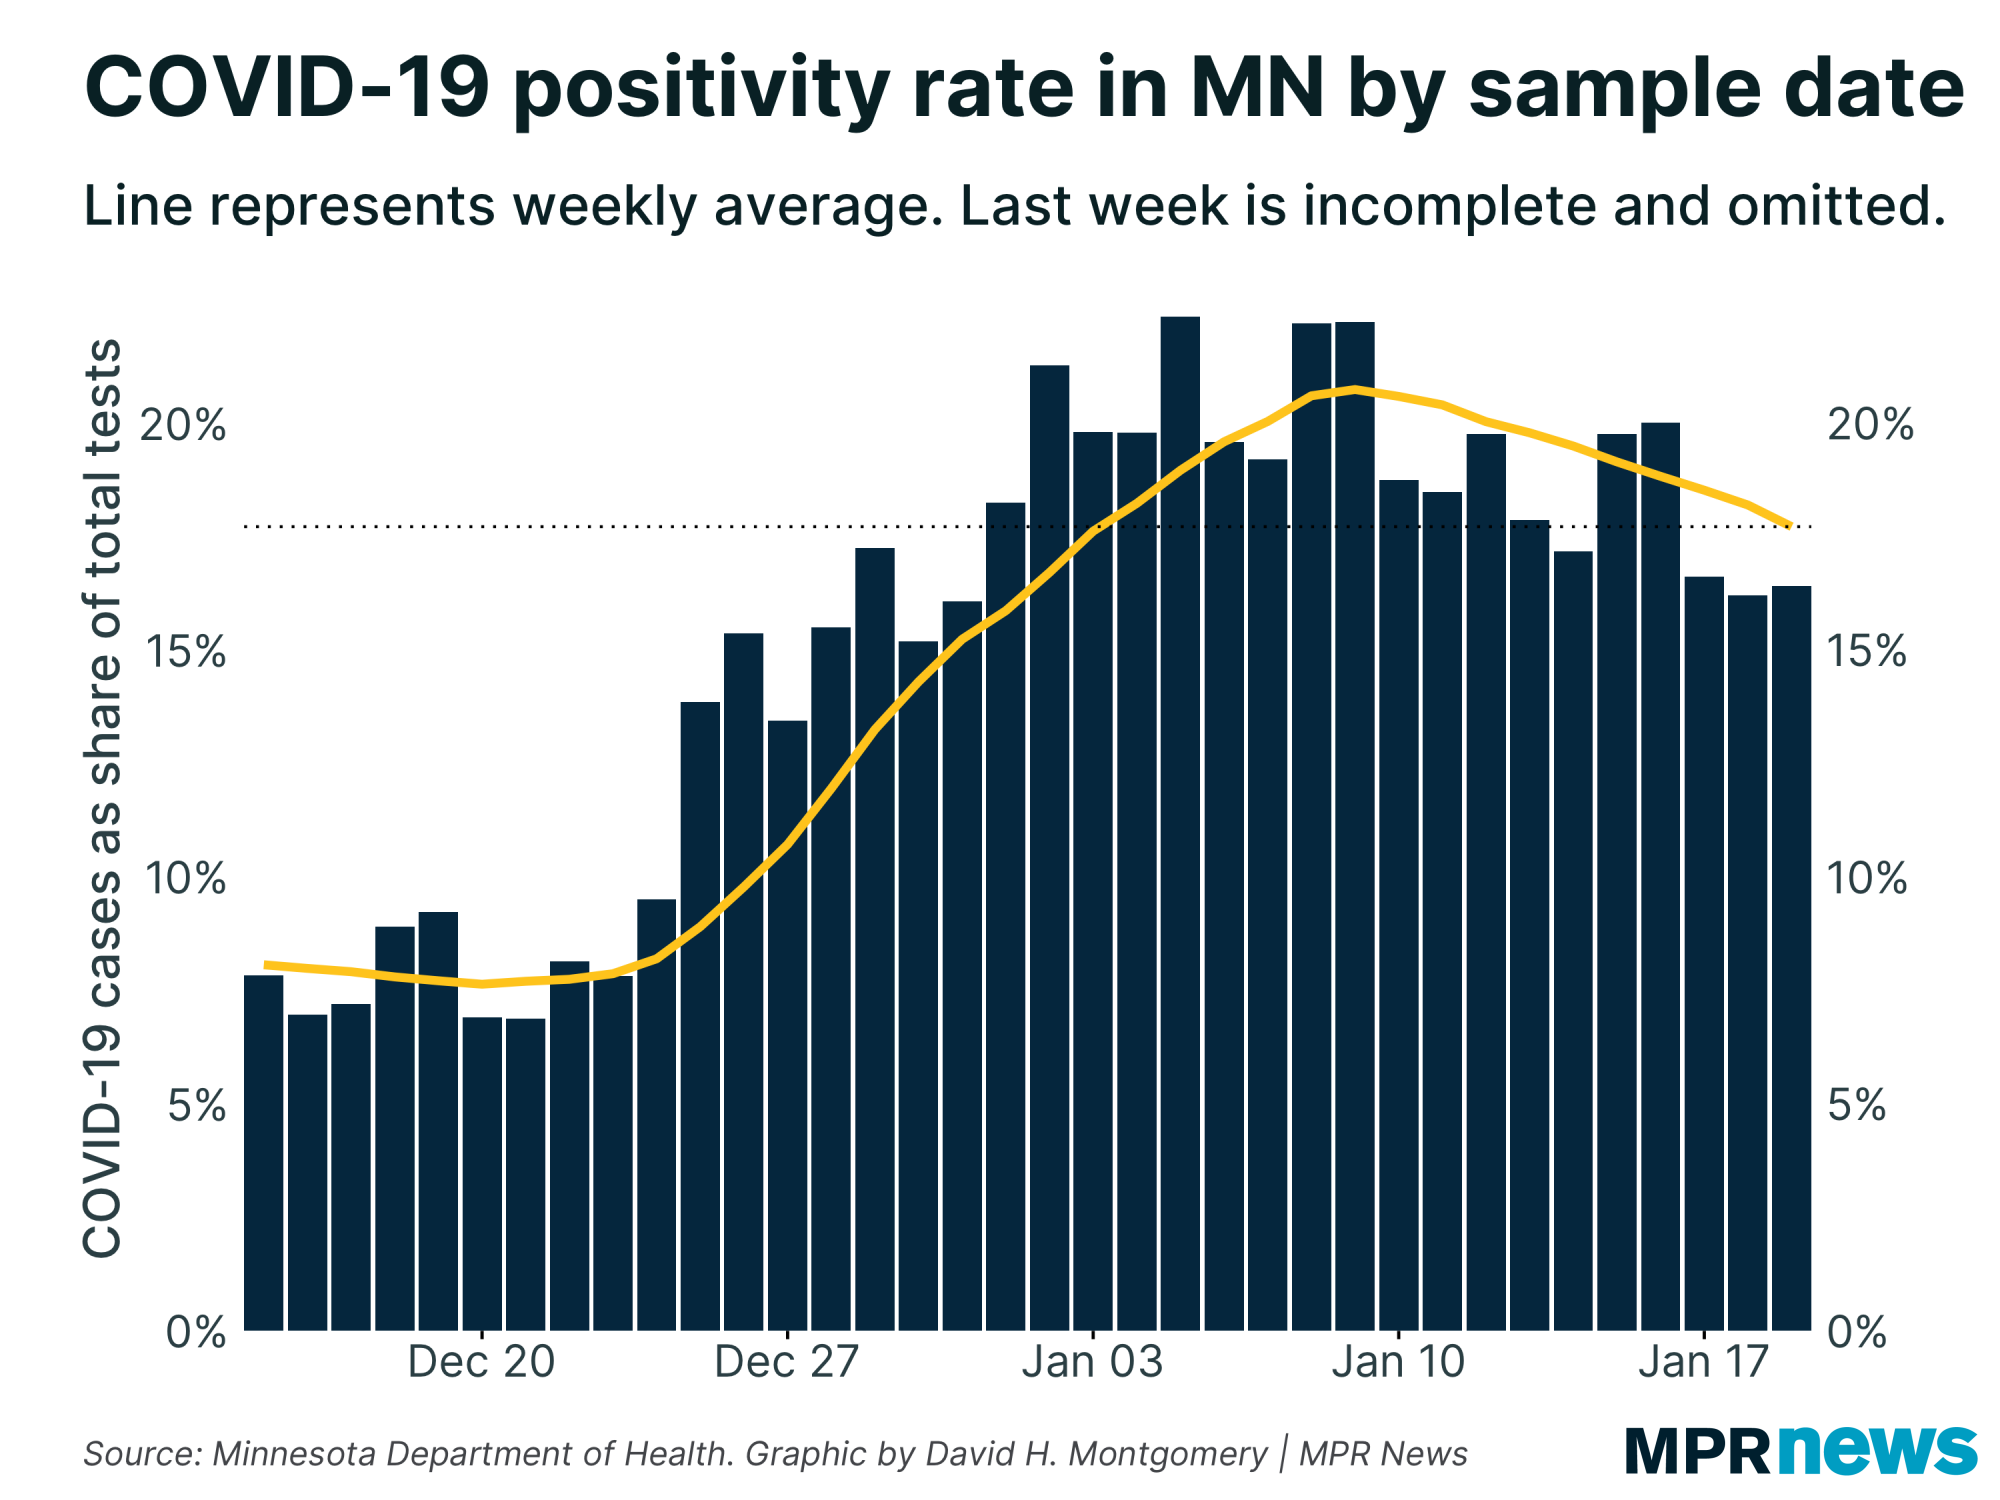 Graph of COVID-19 positivity rate in Minnesota by sample date